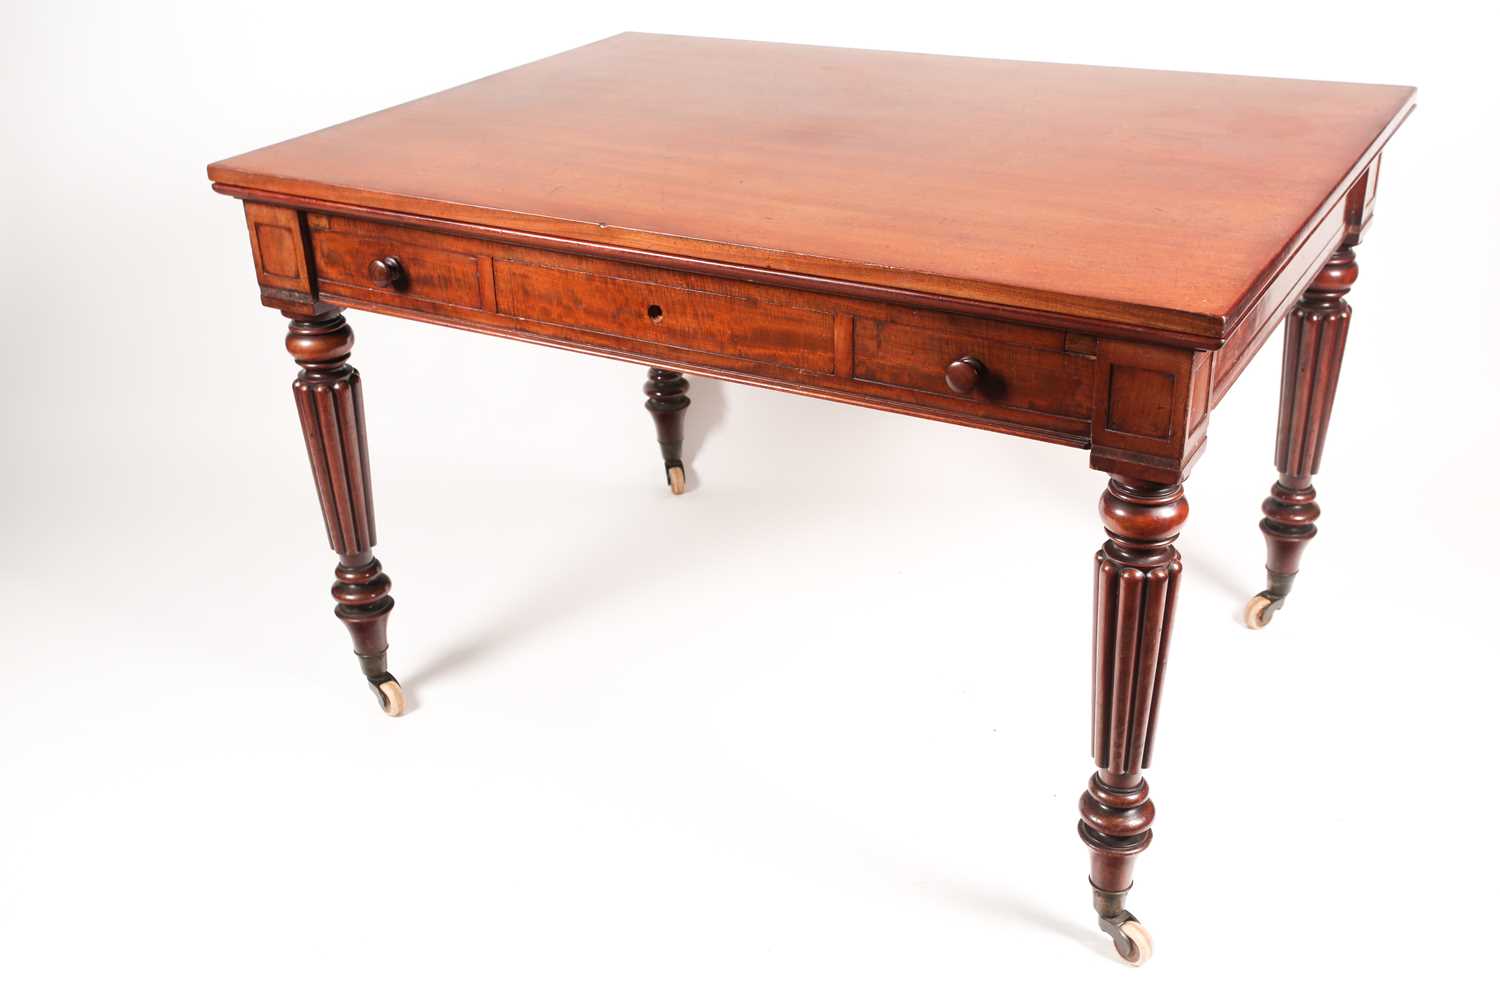 An early 19th-century Gillows of Lancaster style mahogany rectangular chart table with two draw